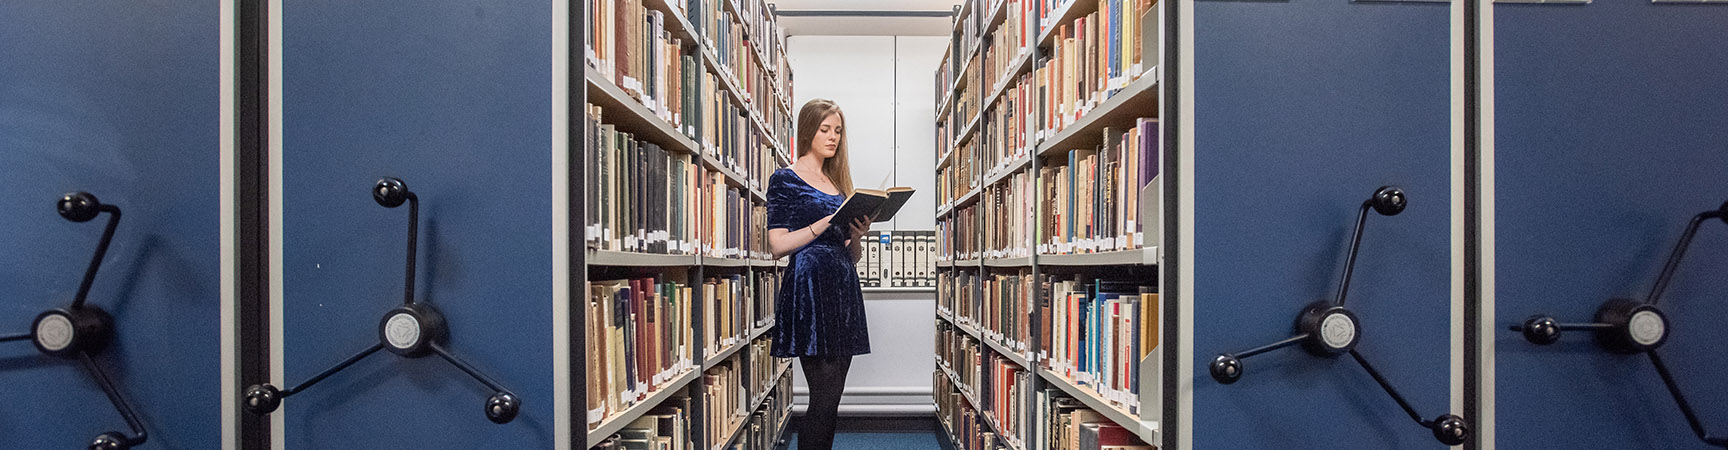 A student holding a book between two bookshelves